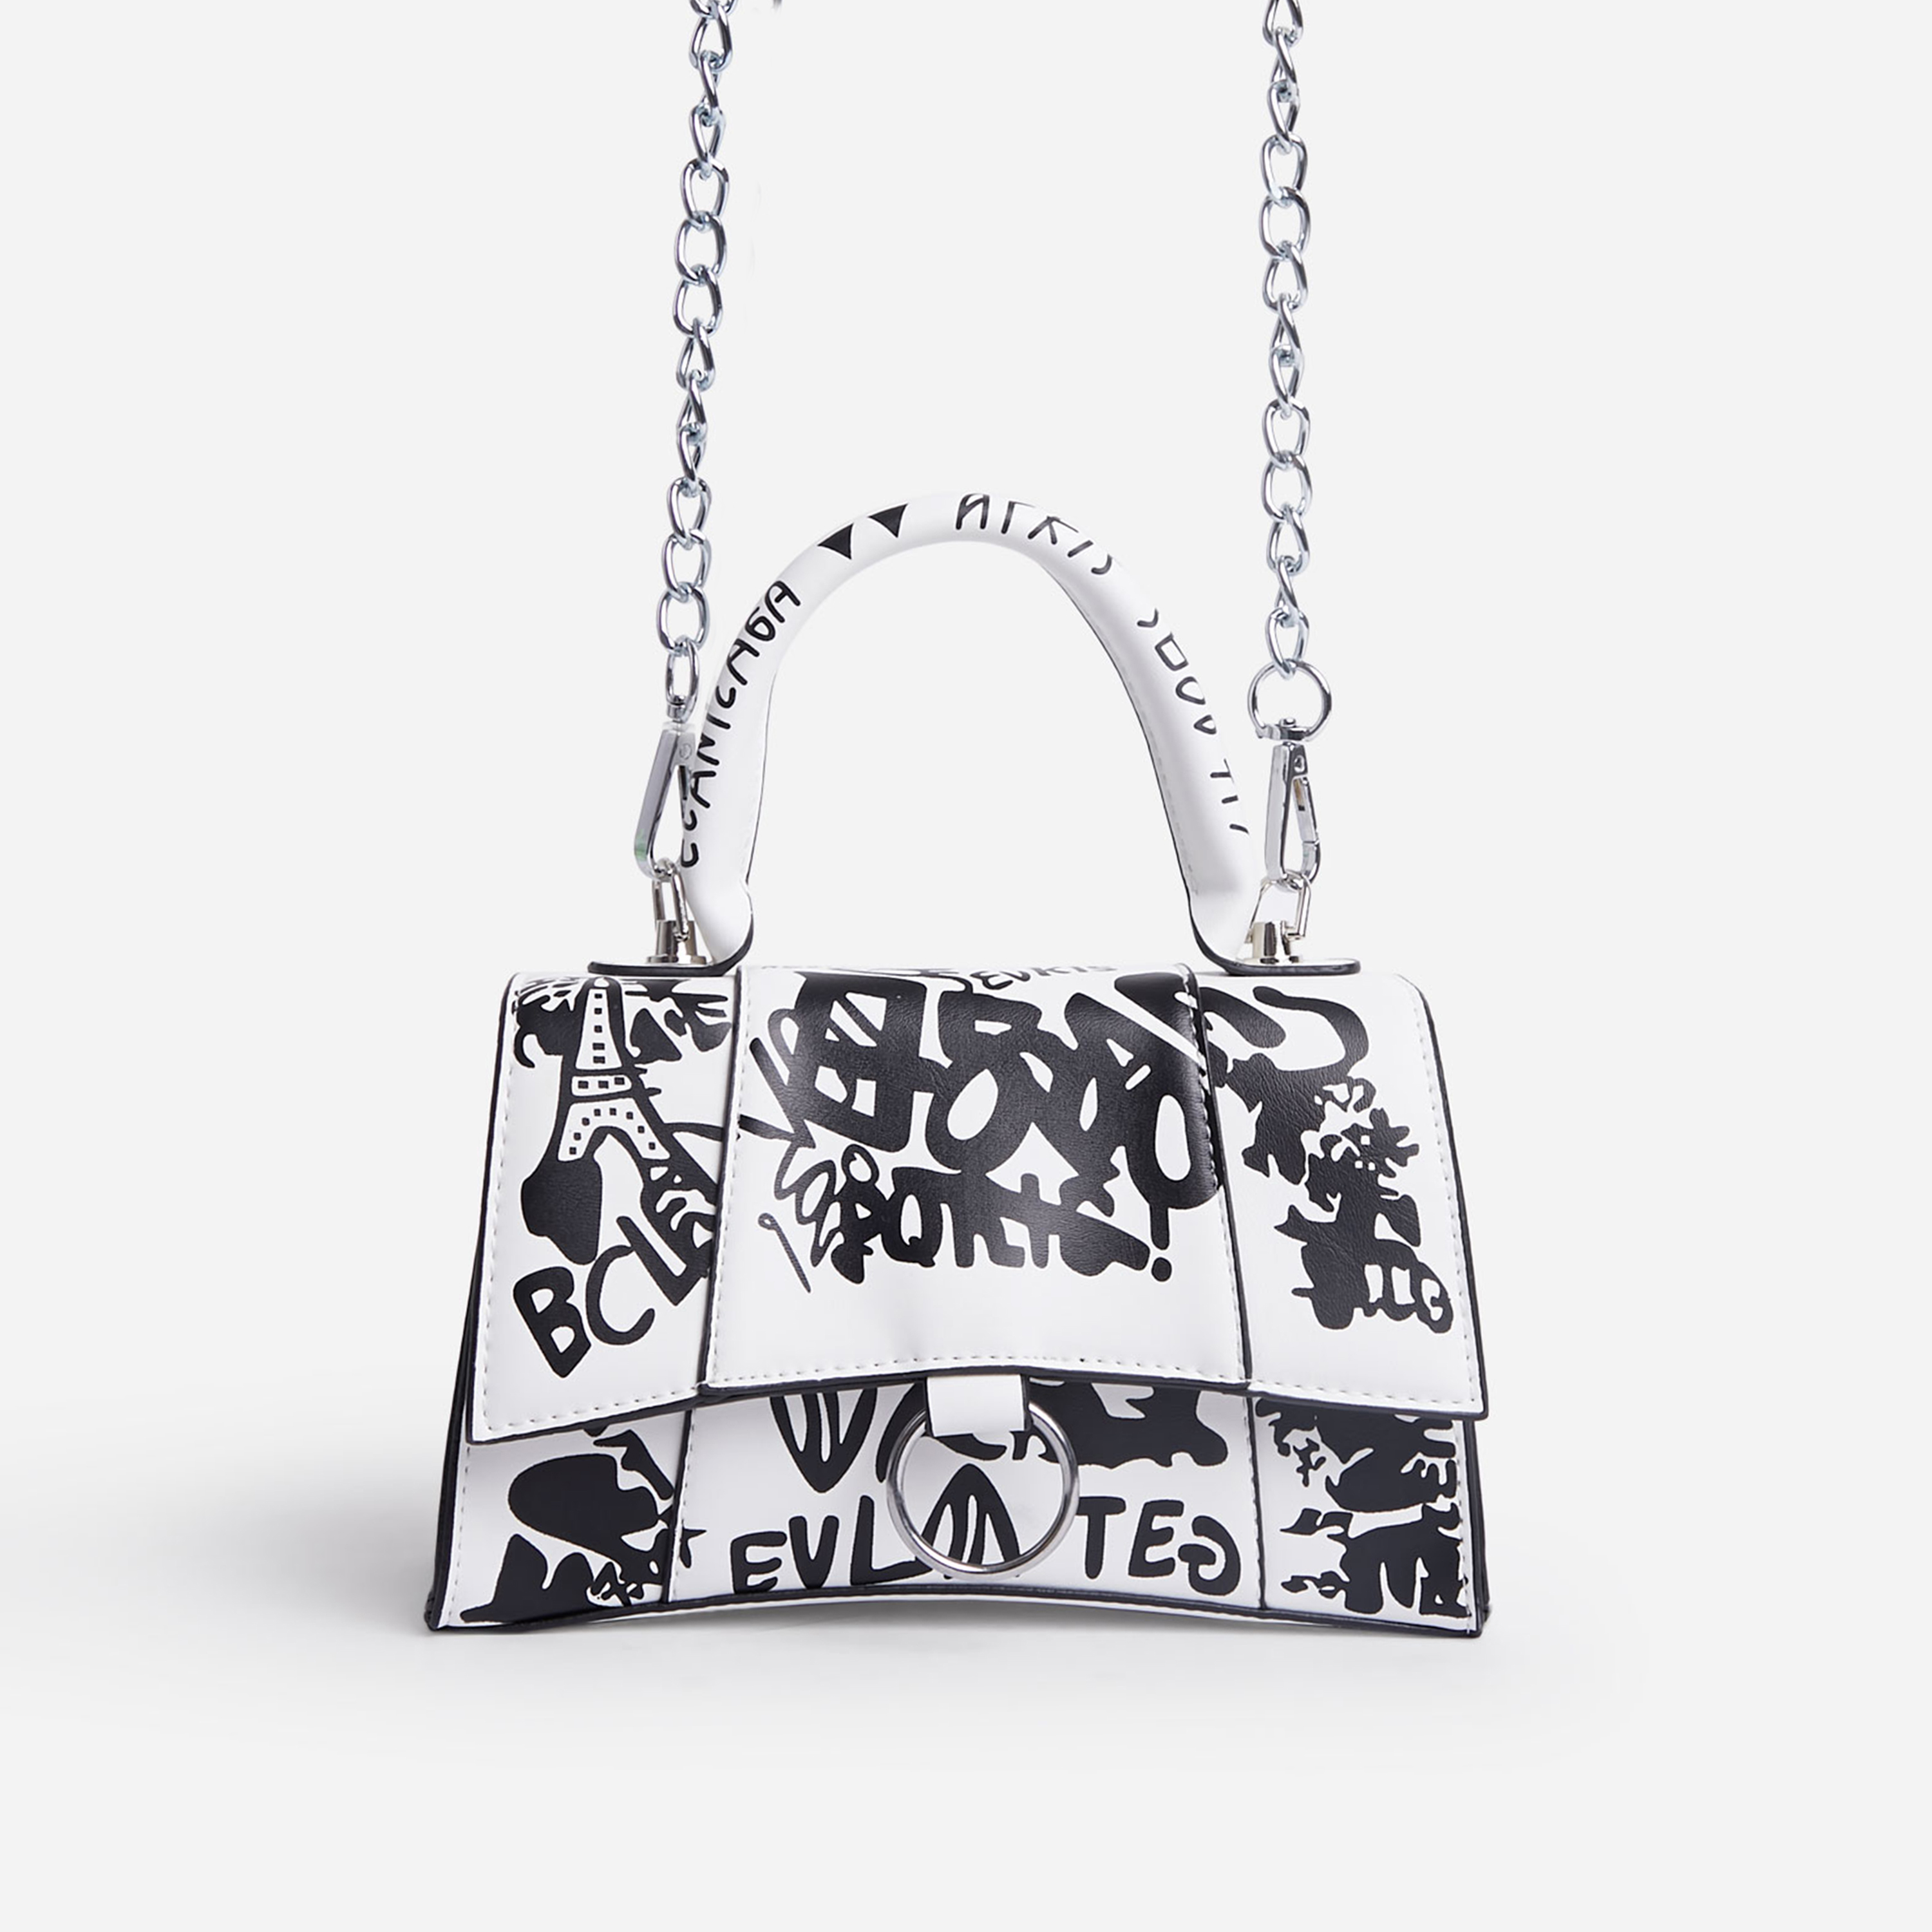 Ego shoulder bag with graffiti print and chain strap in pink